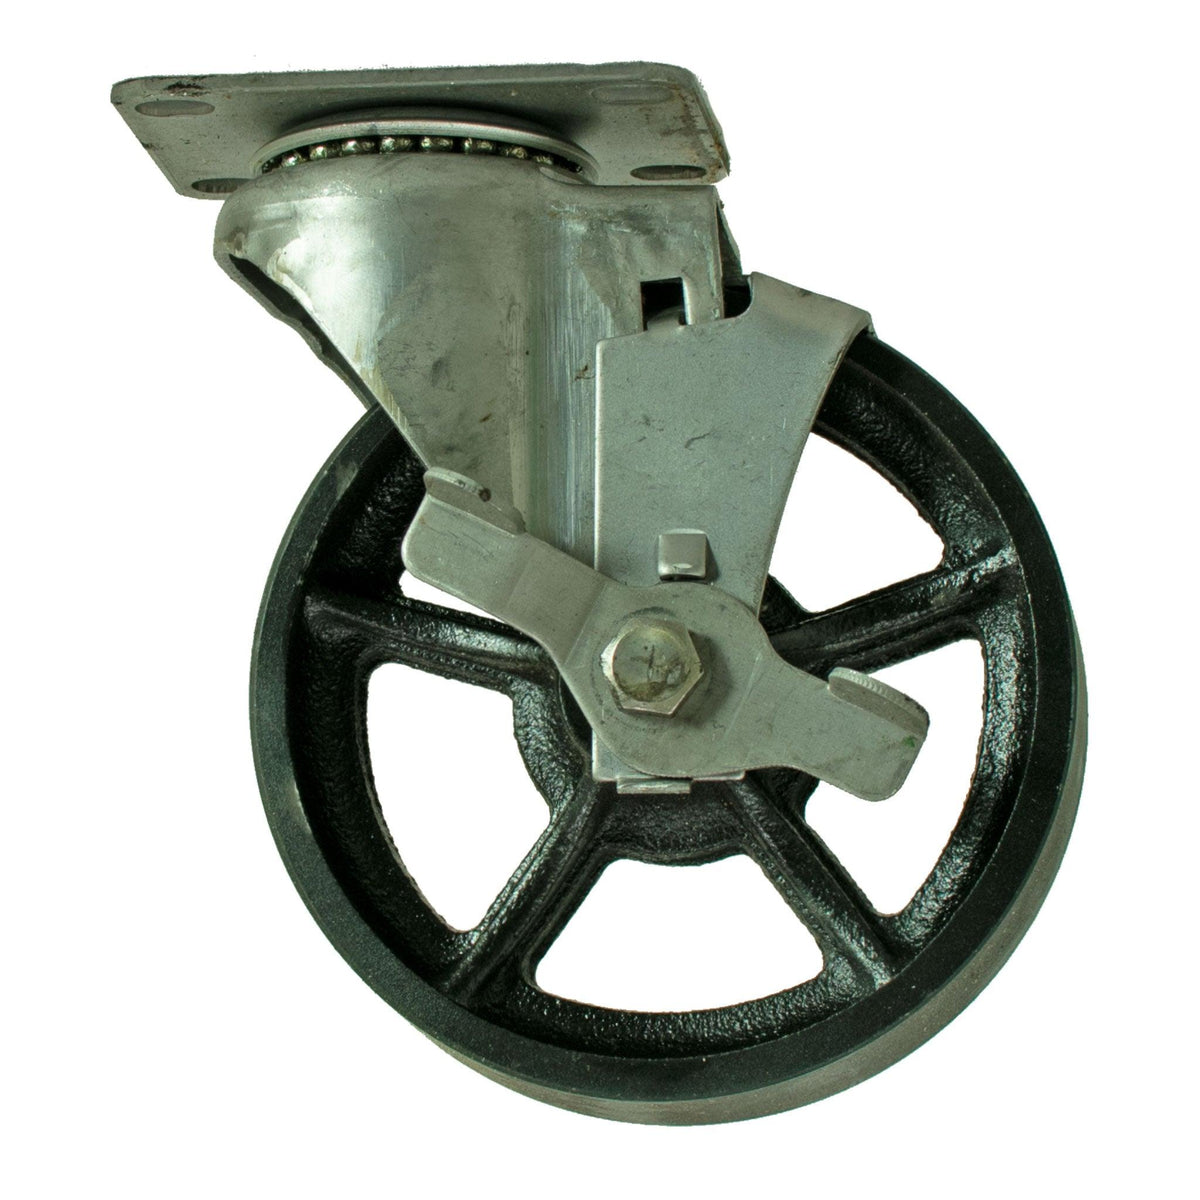 Now Selling Brand New Vintage Cast Iron Casters.  Purchase the casters we include on our Redwood Potting Tables and Outdoor Rolling Carts from leedisplay.com